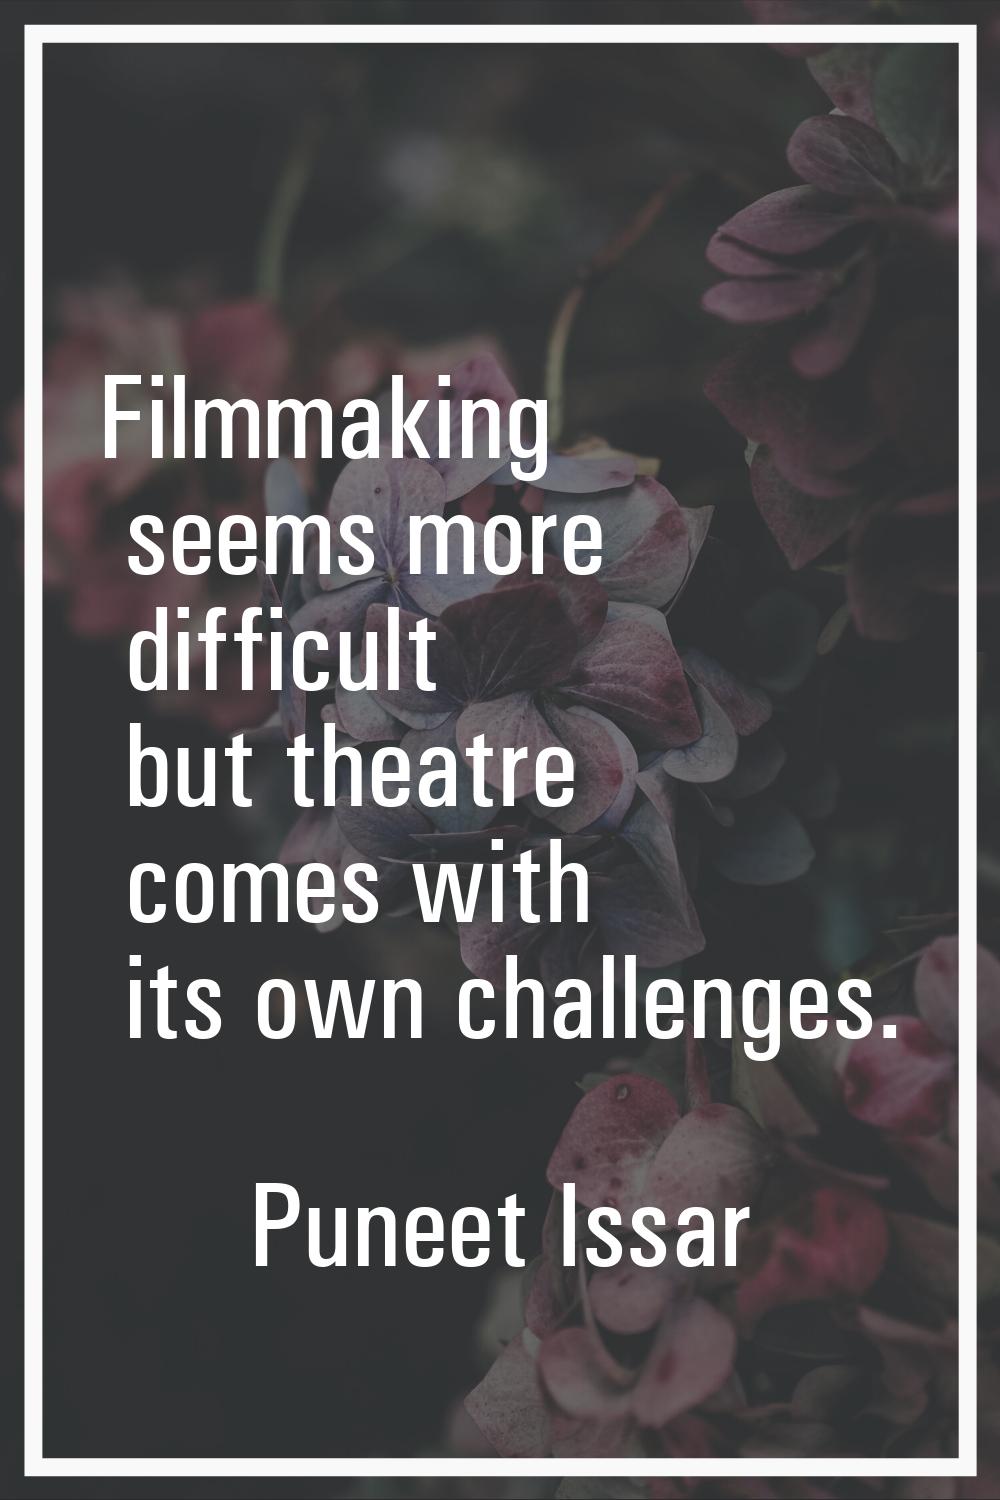 Filmmaking seems more difficult but theatre comes with its own challenges.